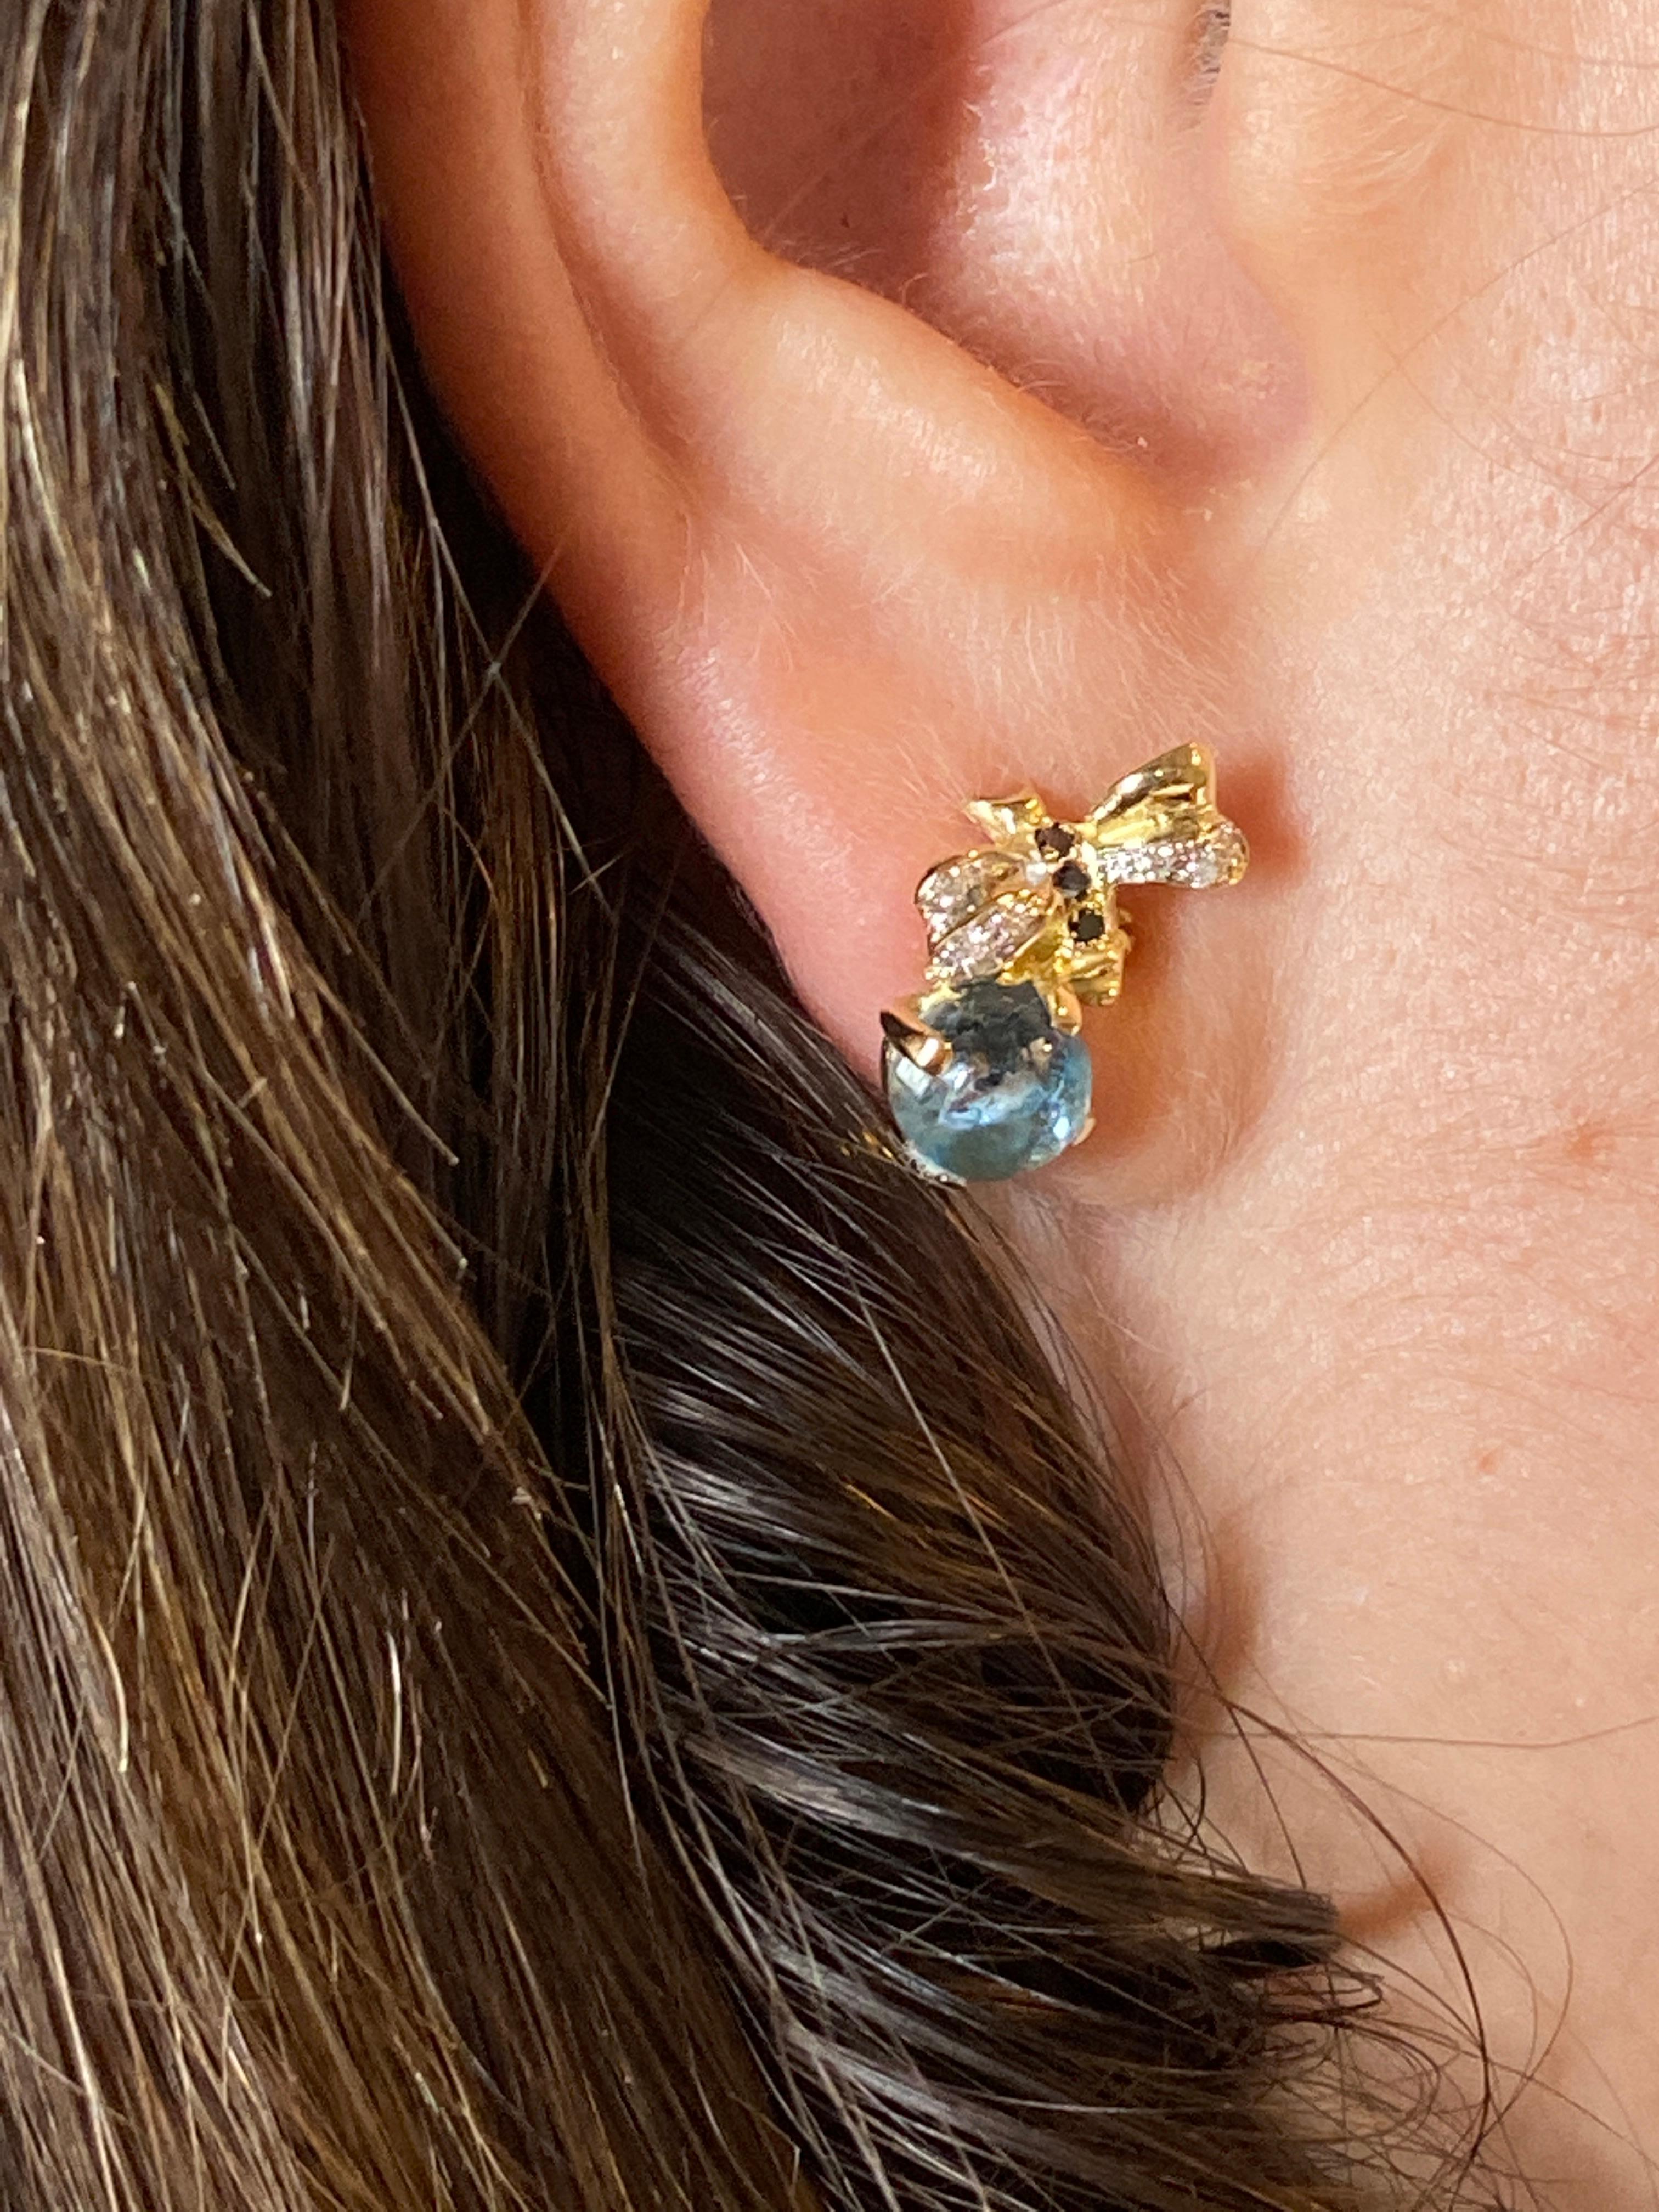 Celebrate nature's intricate beauty with the Rossella Ugolini Design Collection, featuring enchanting 18 Karat Yellow Gold Bee Stud Earrings. Adorned with a captivating 2.16 Carat Aquamarine, alongside 0.10 Karats of White Diamonds and 0.06 Karats